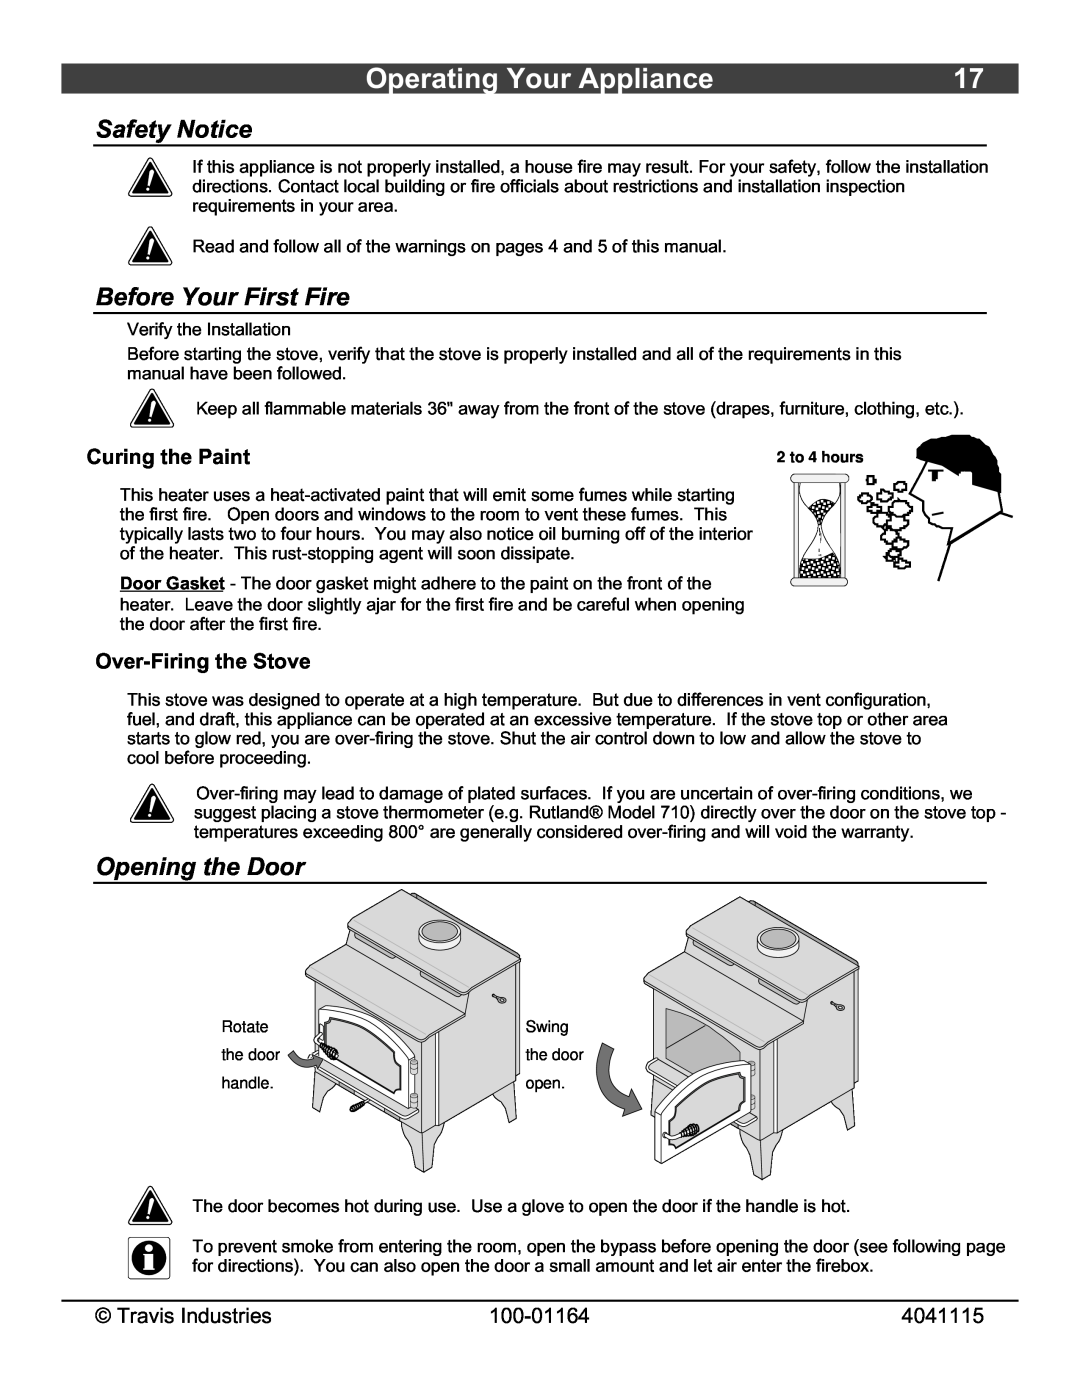 Lopi Liberty Wood Stove Operating Your Appliance, Safety Notice, Before Your First Fire, Opening the Door, 100-01164 